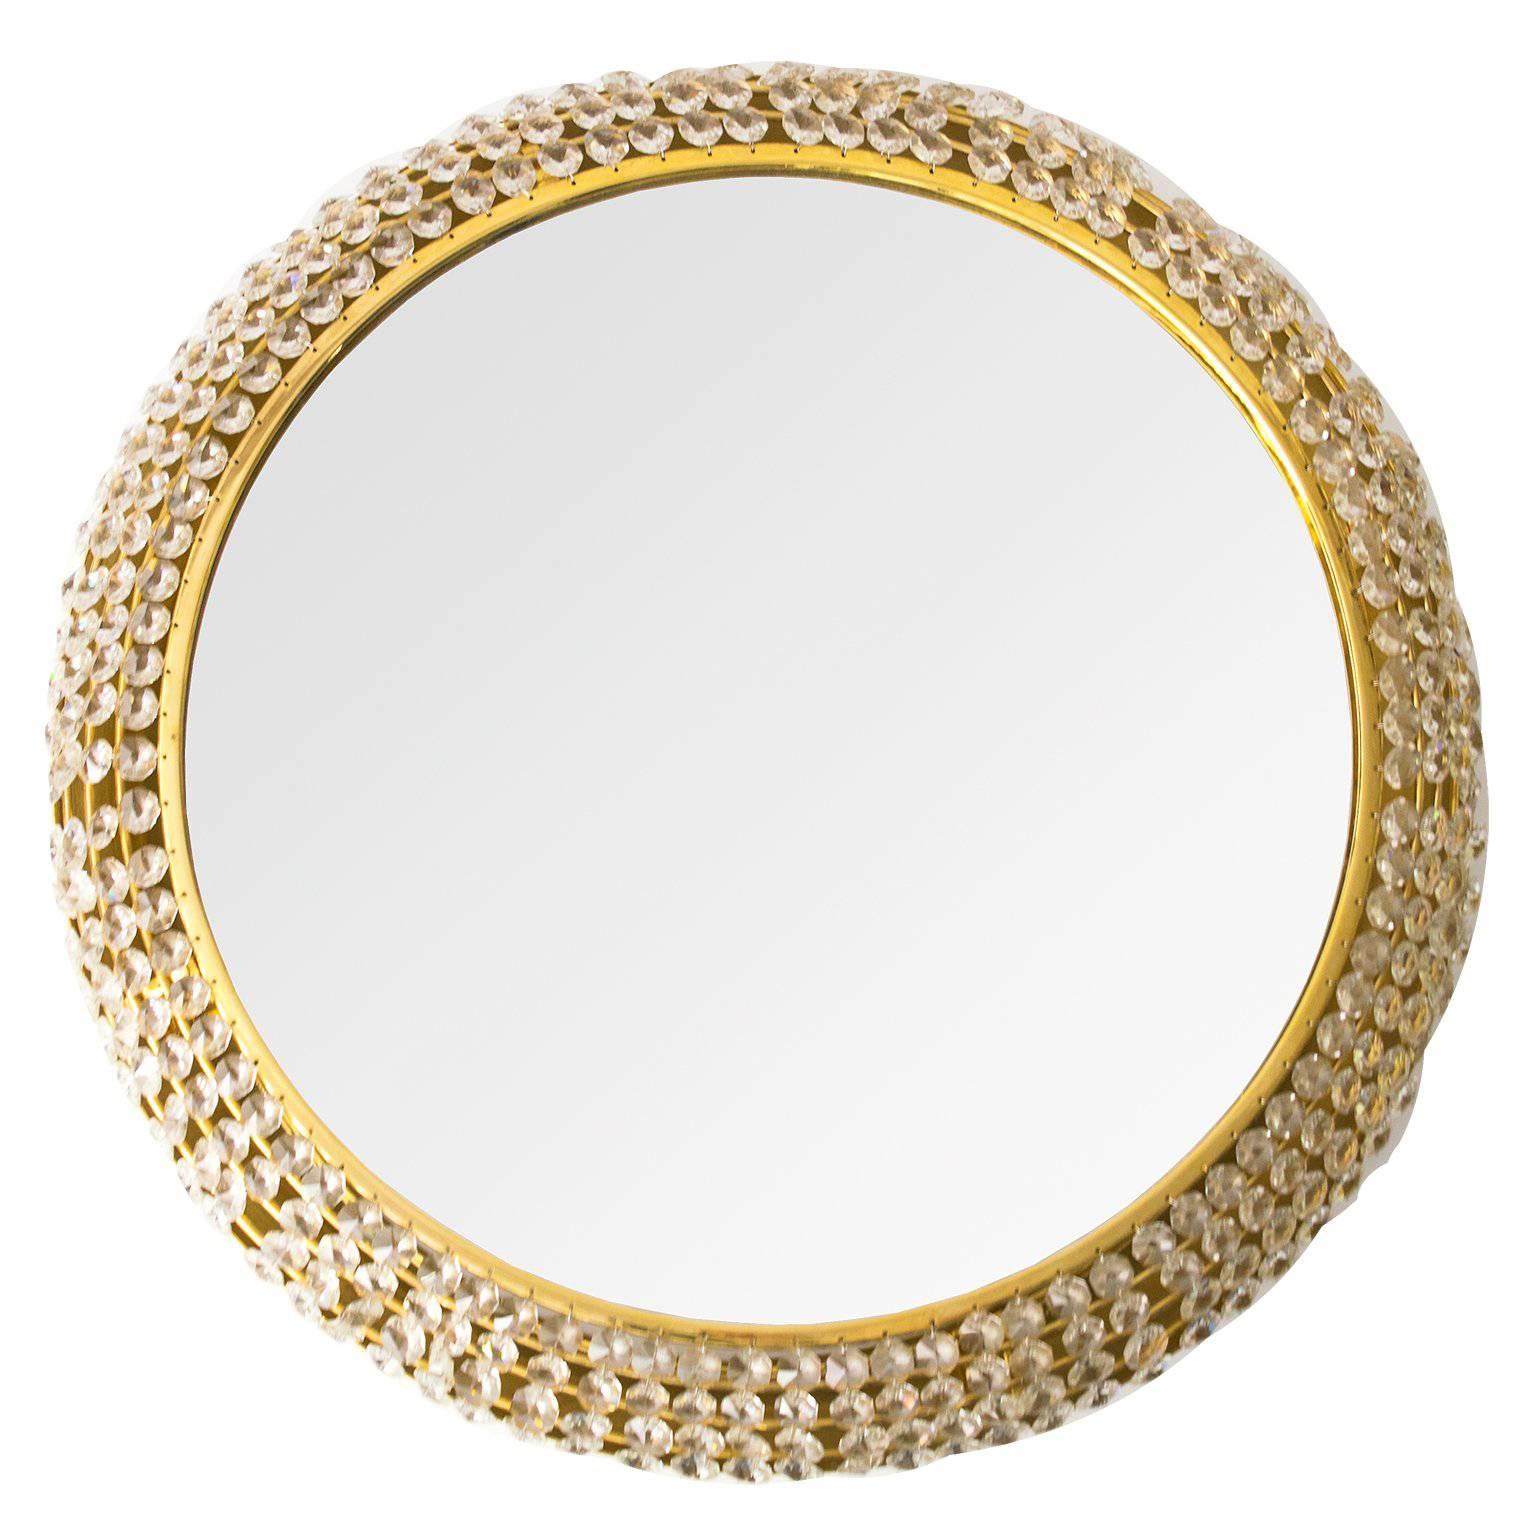 Midcentury Modern Palwa Gilded Brass Round Mirror Decorated with Crystals